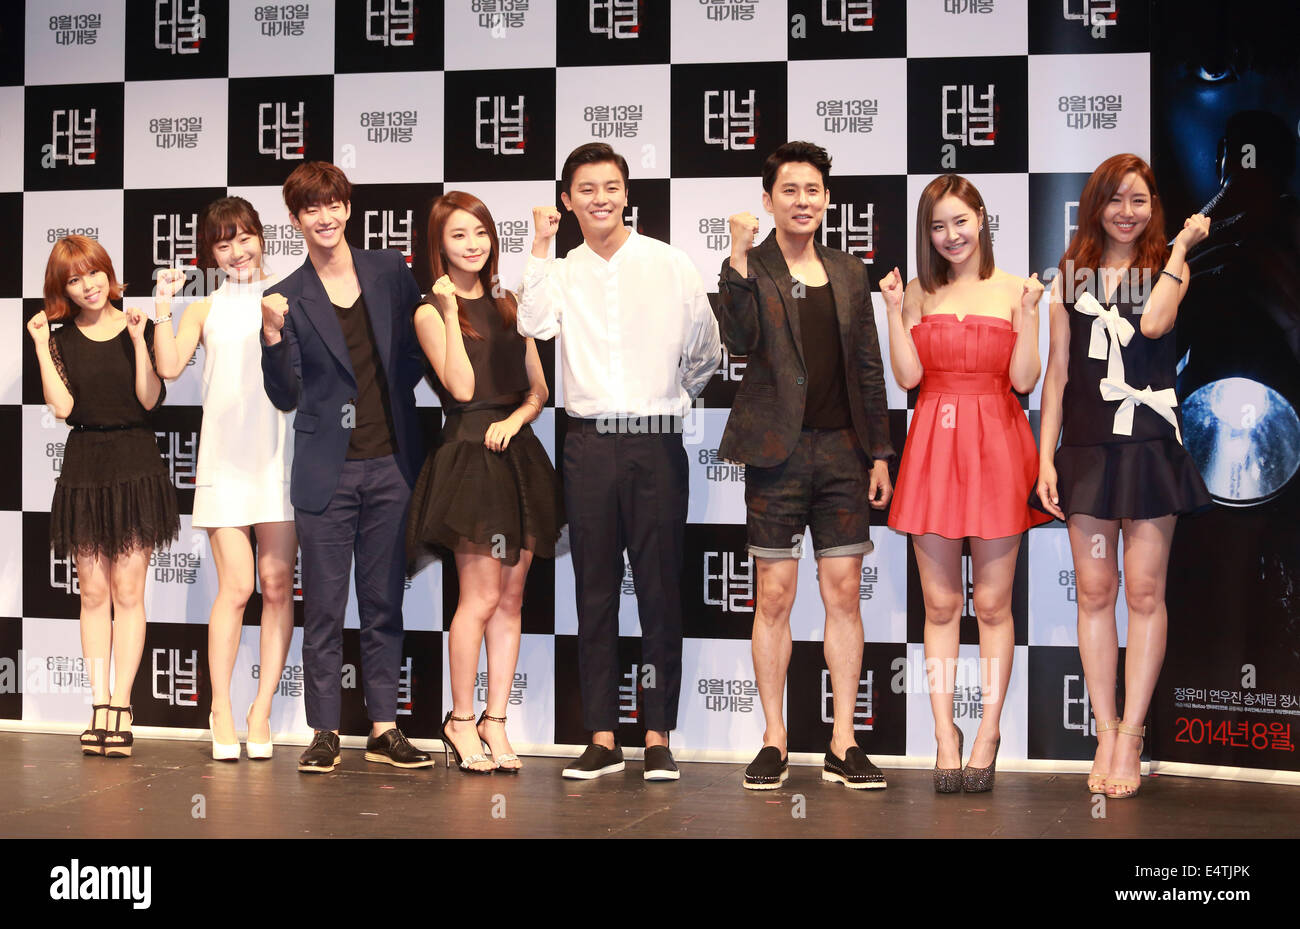 Do-Hee(Tiny-G), Lee Si-Won, Song Jae-Lim, Jeong Yu-Mi, Yeon Woo-Jin, Lee Jae-Hee, Woo-Hee(DAL SHABET) and Jung Si-Yeon, Jul 16, 2014 : (L-R) South Korean singer and actress Dohee, a member of girl group Tiny-G, actress Lee Si-Won, actor Song Jae-Lim, actress Jeong Yu-Mi, actor Yeon Woo-Jin, actor Lee Jae-Hee, singer and actress Woohee, a member of girl group Dal Shabet and singer and actress Jung Si-Yeon pose during a presentation for their new movie, The Tunnel, in Seoul, South Korea. © Lee Jae-Won/AFLO/Alamy Live News Stock Photo